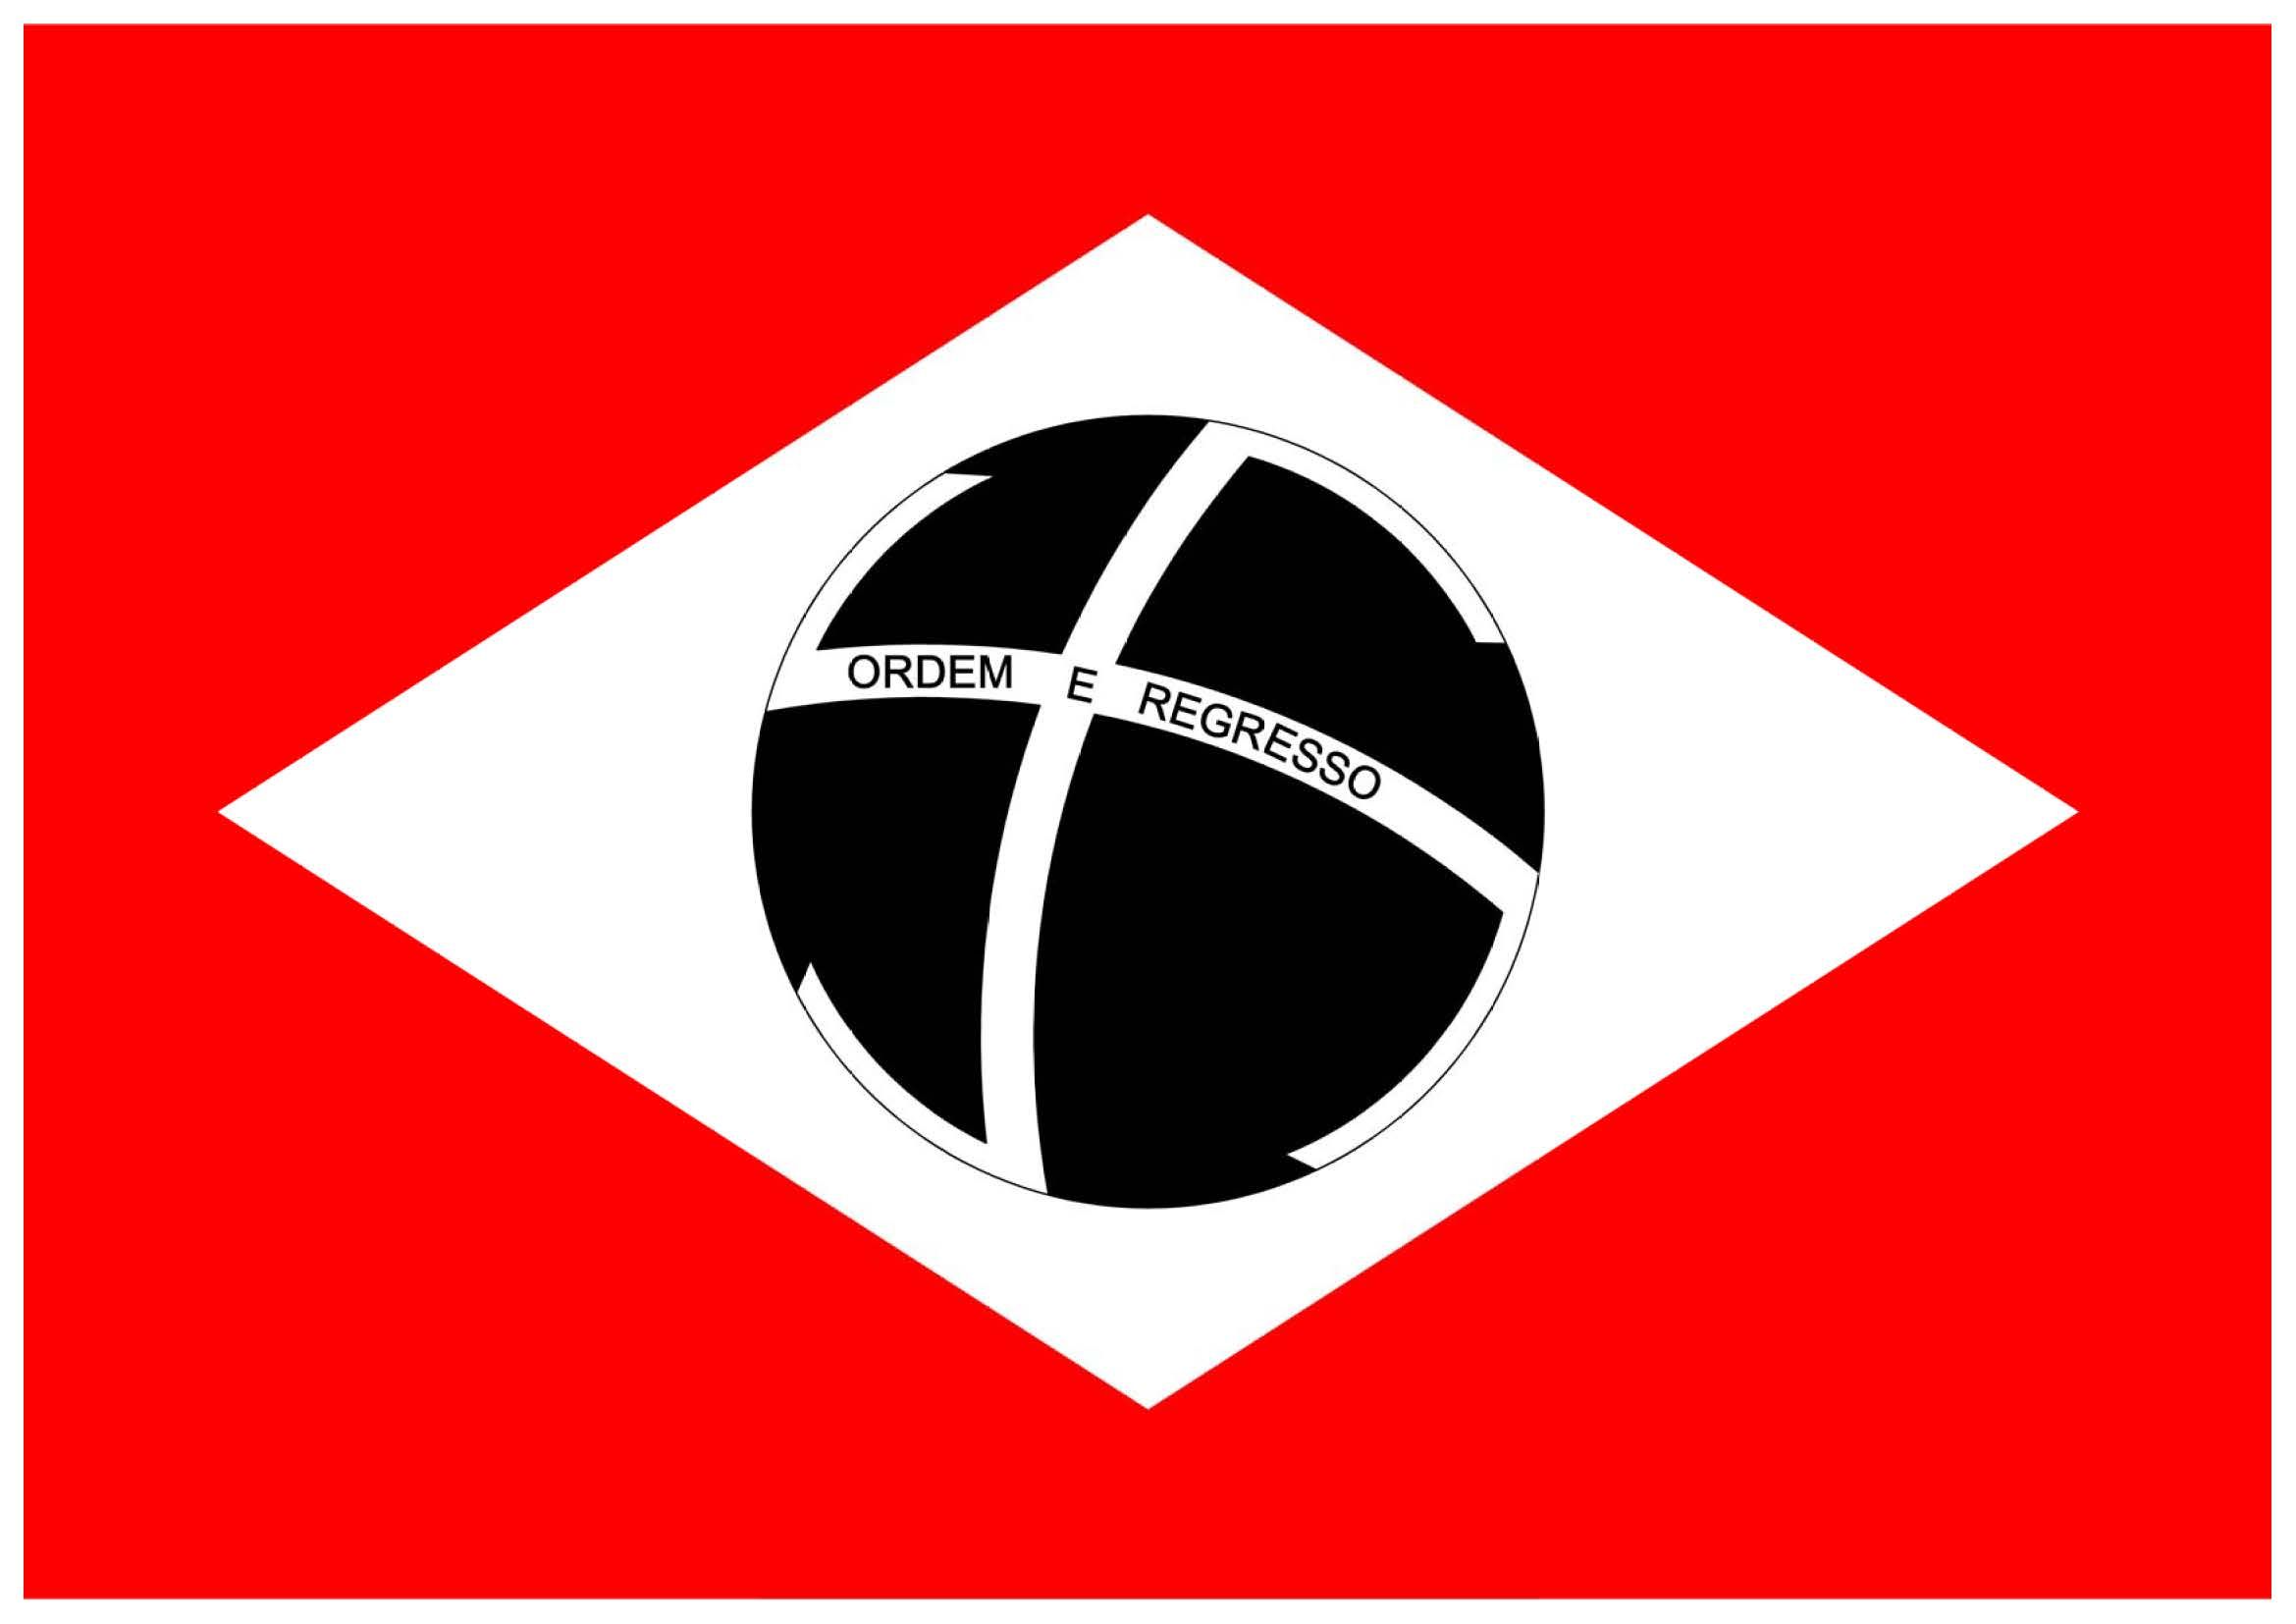 I hear Brazil is shopping around for a new flag